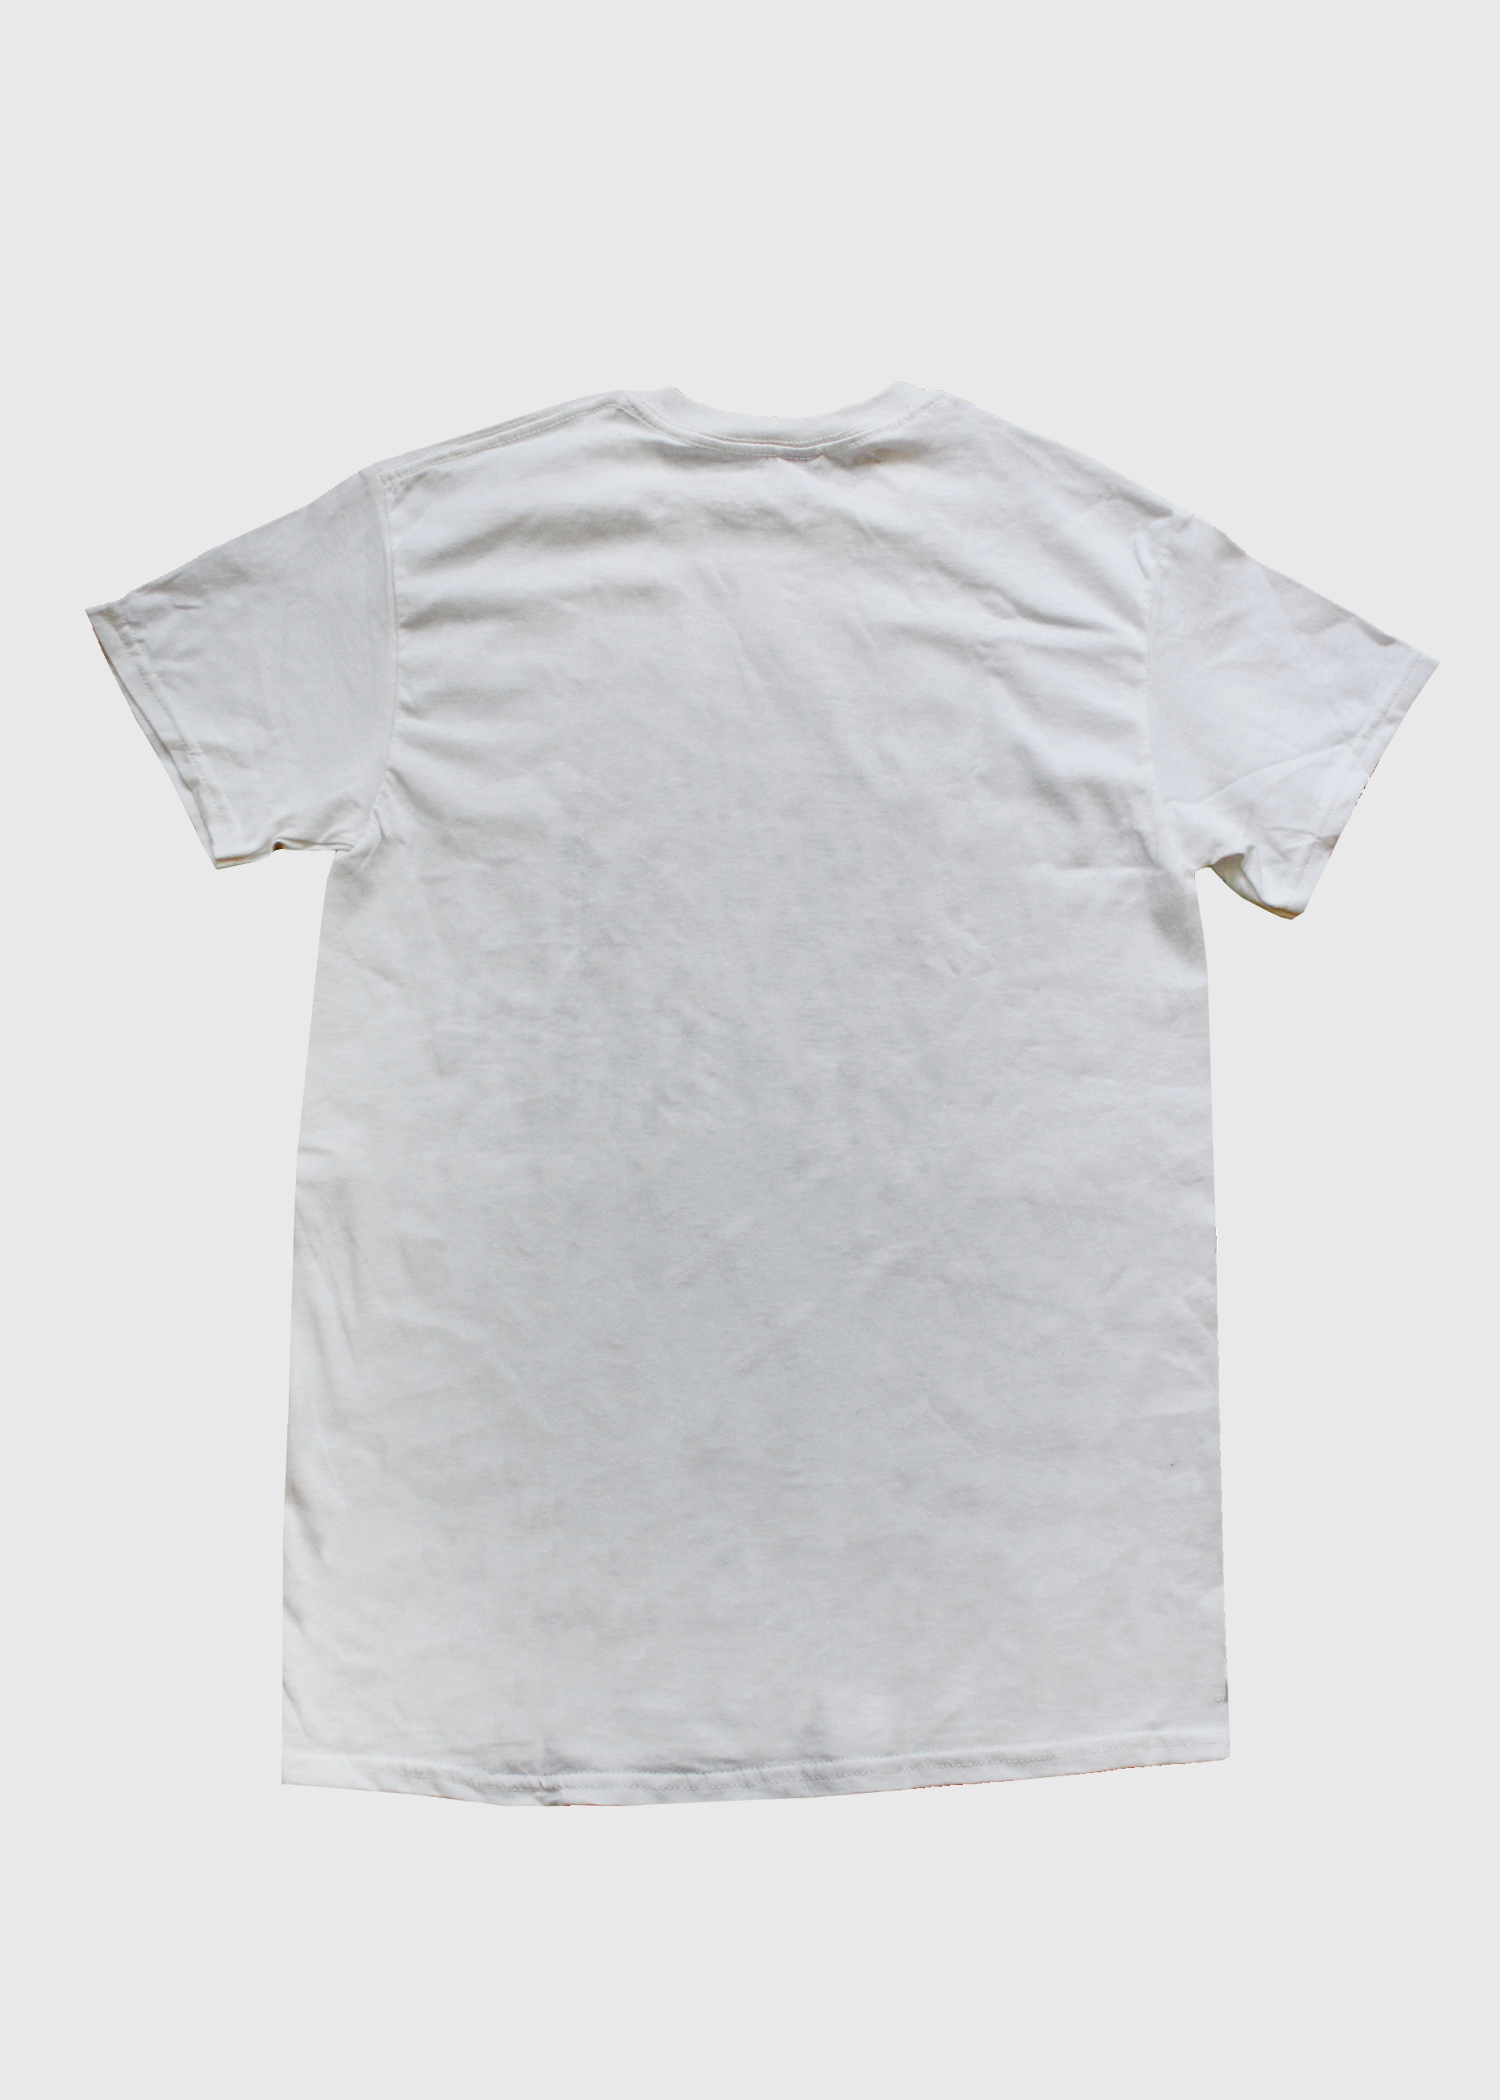 A back view of the white t-shit